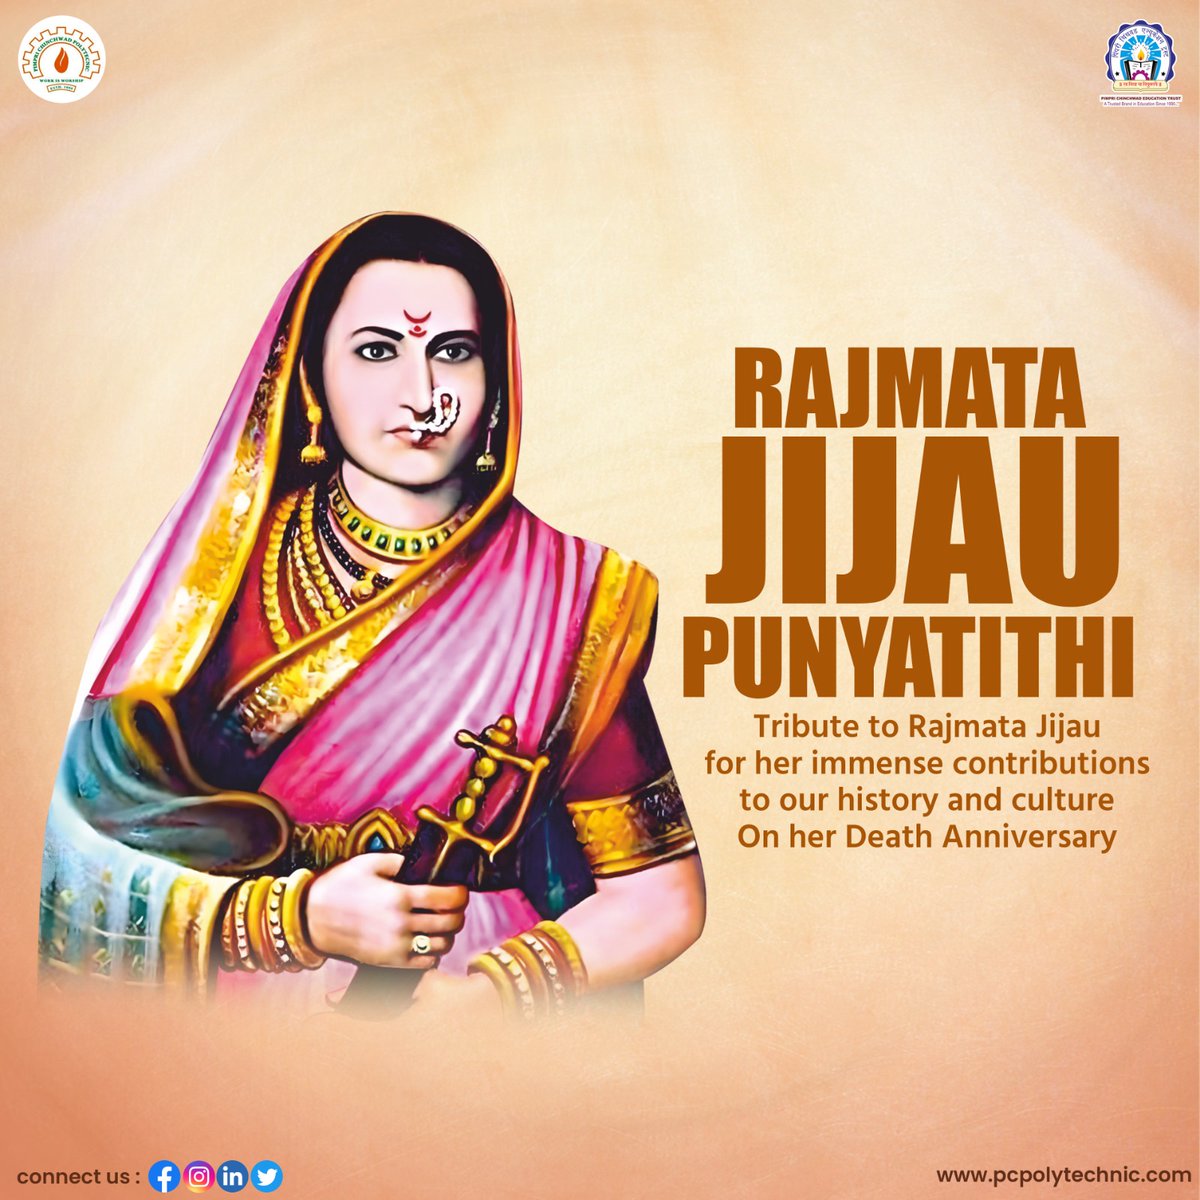 We pay tribute to #RajmataJijau for her immense contributions to our history and culture. Her legacy lives on, reminding us of the importance of determination, compassion, & power of a mother's love. 

#PCET #PCP #jijau #shivajimaharaj #swarajya #pune #JayJijauJayShivray #tribute